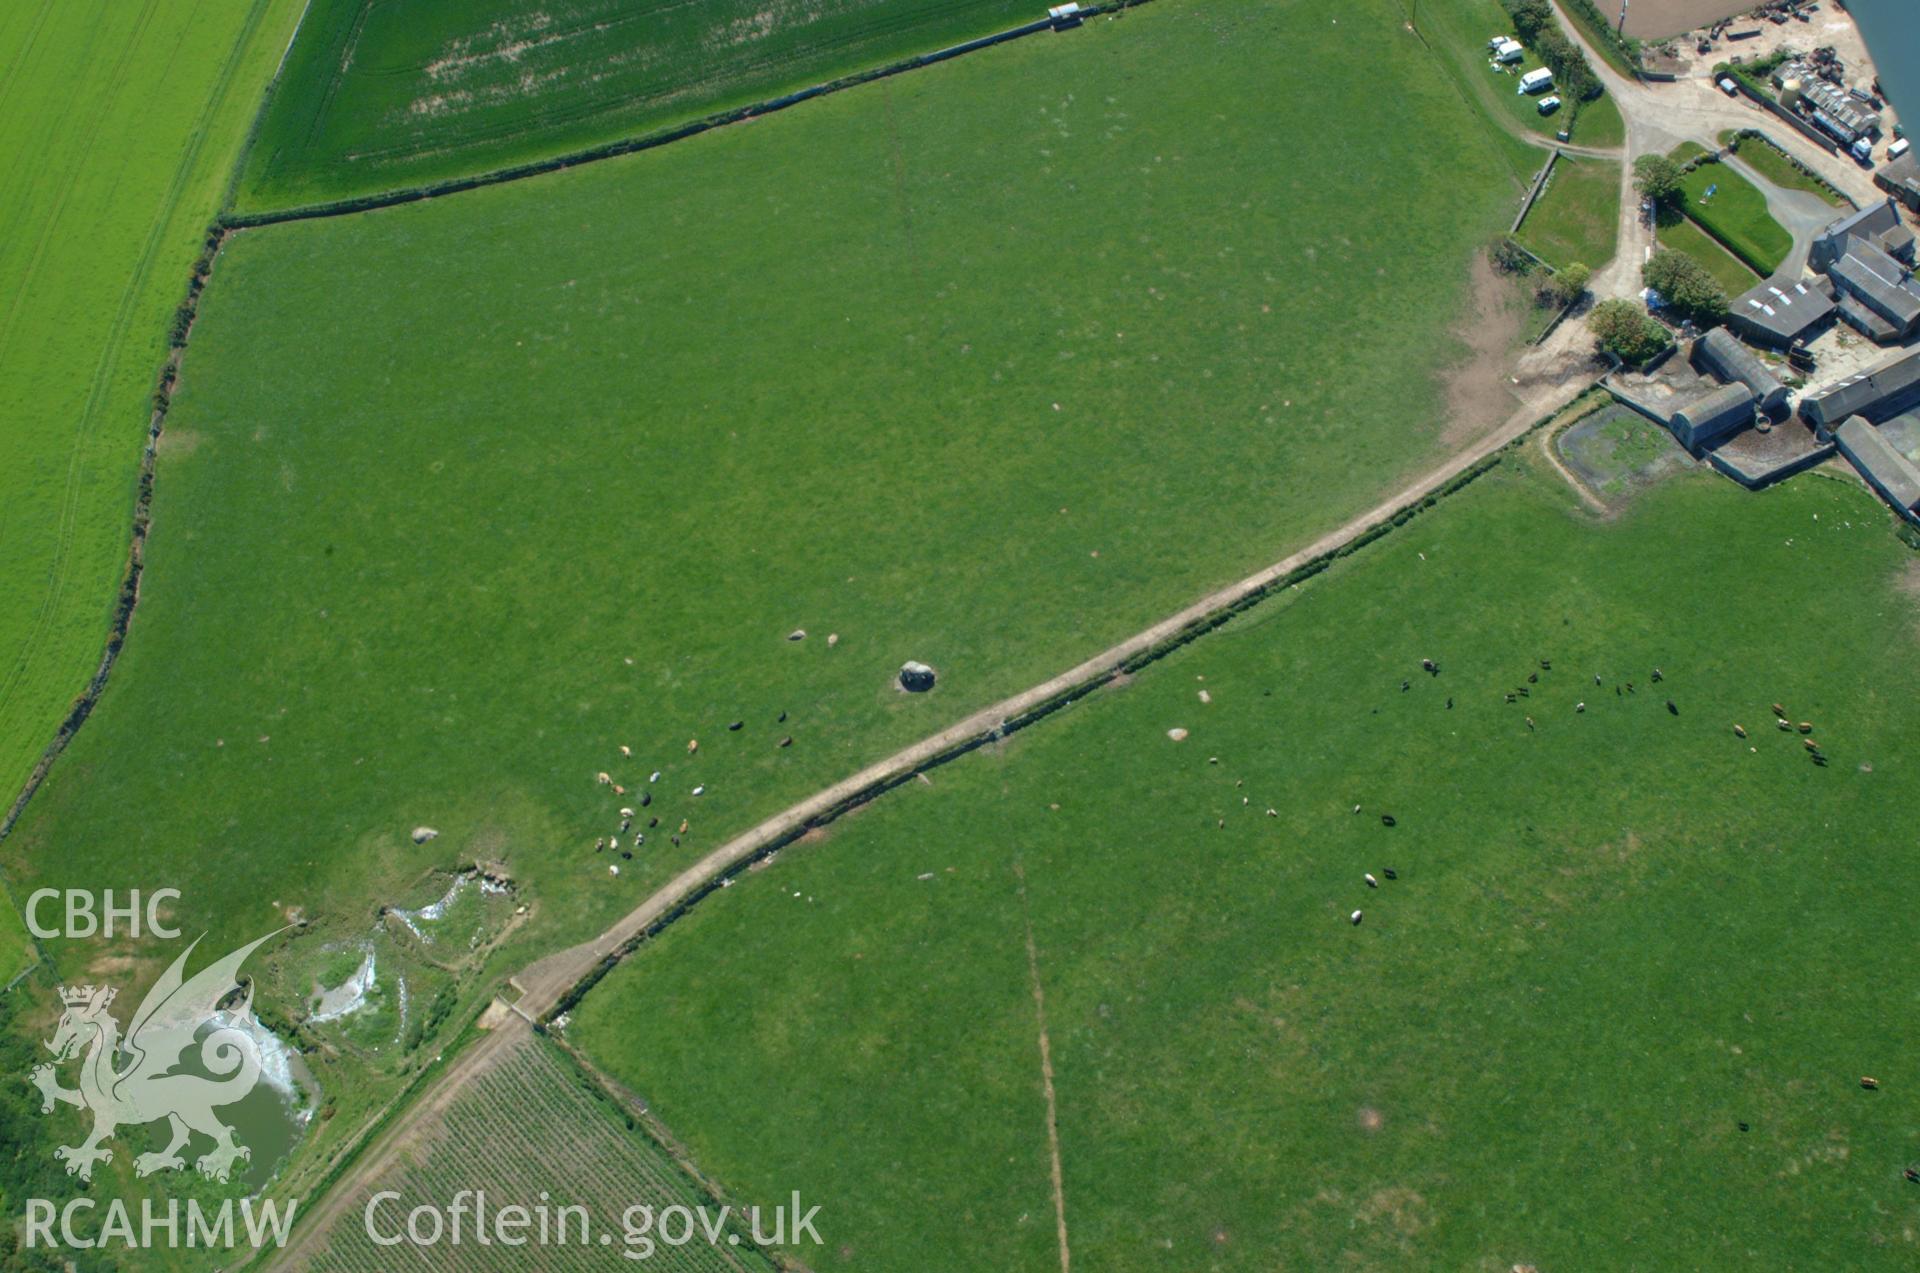 RCAHMW colour oblique aerial photograph of Carreg Samson Burial Chamber taken on 25/05/2004 by Toby Driver